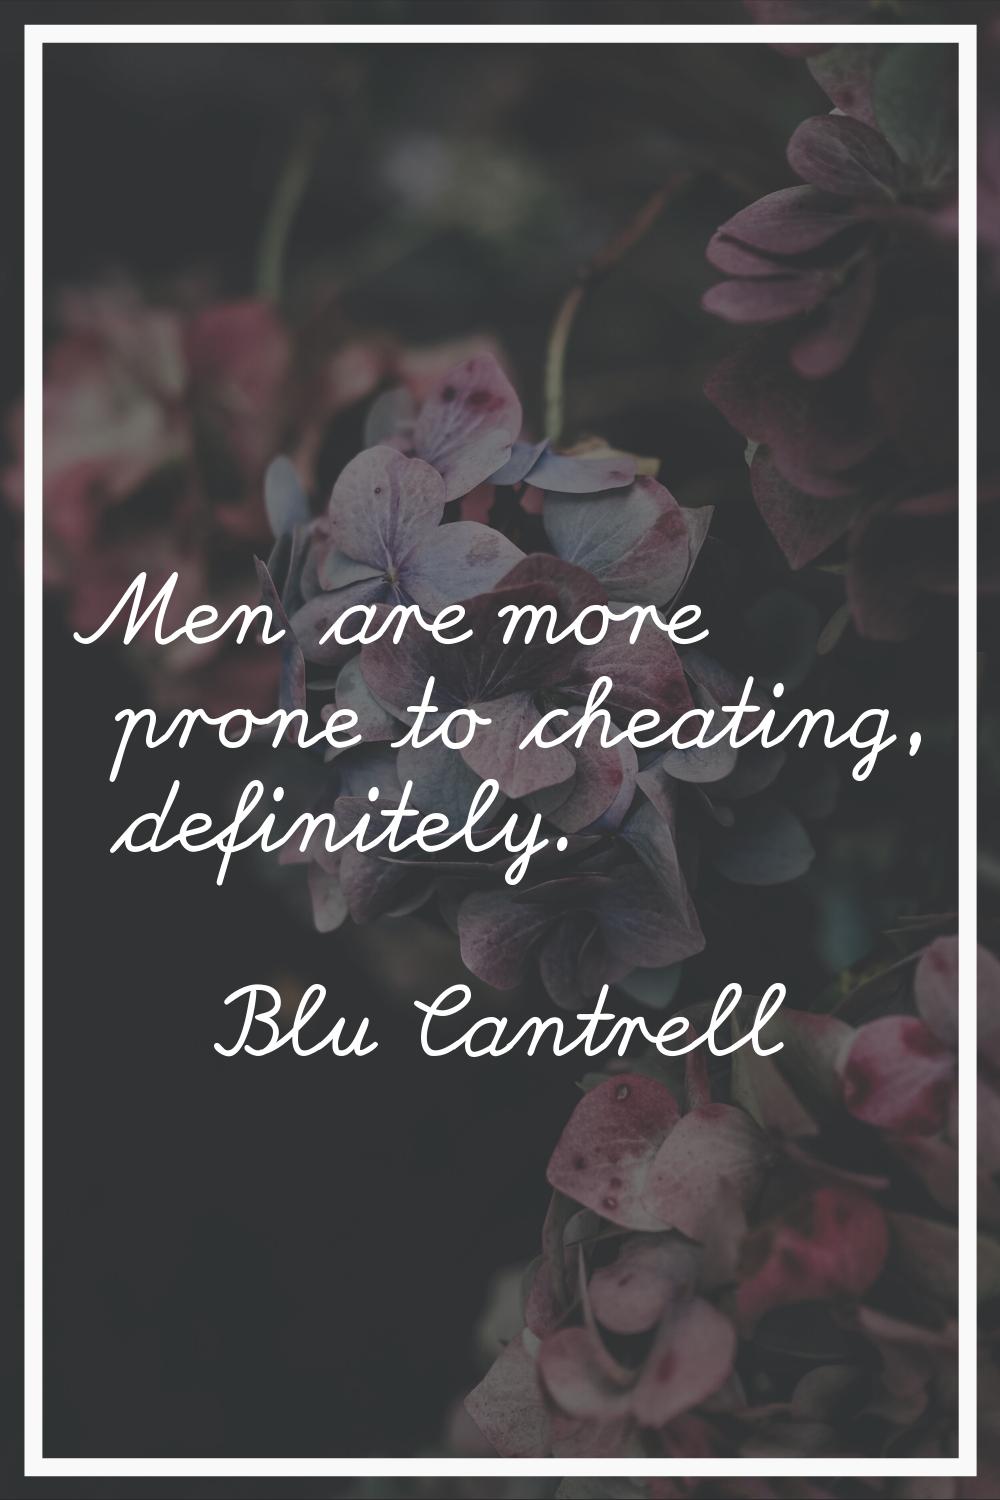 Men are more prone to cheating, definitely.